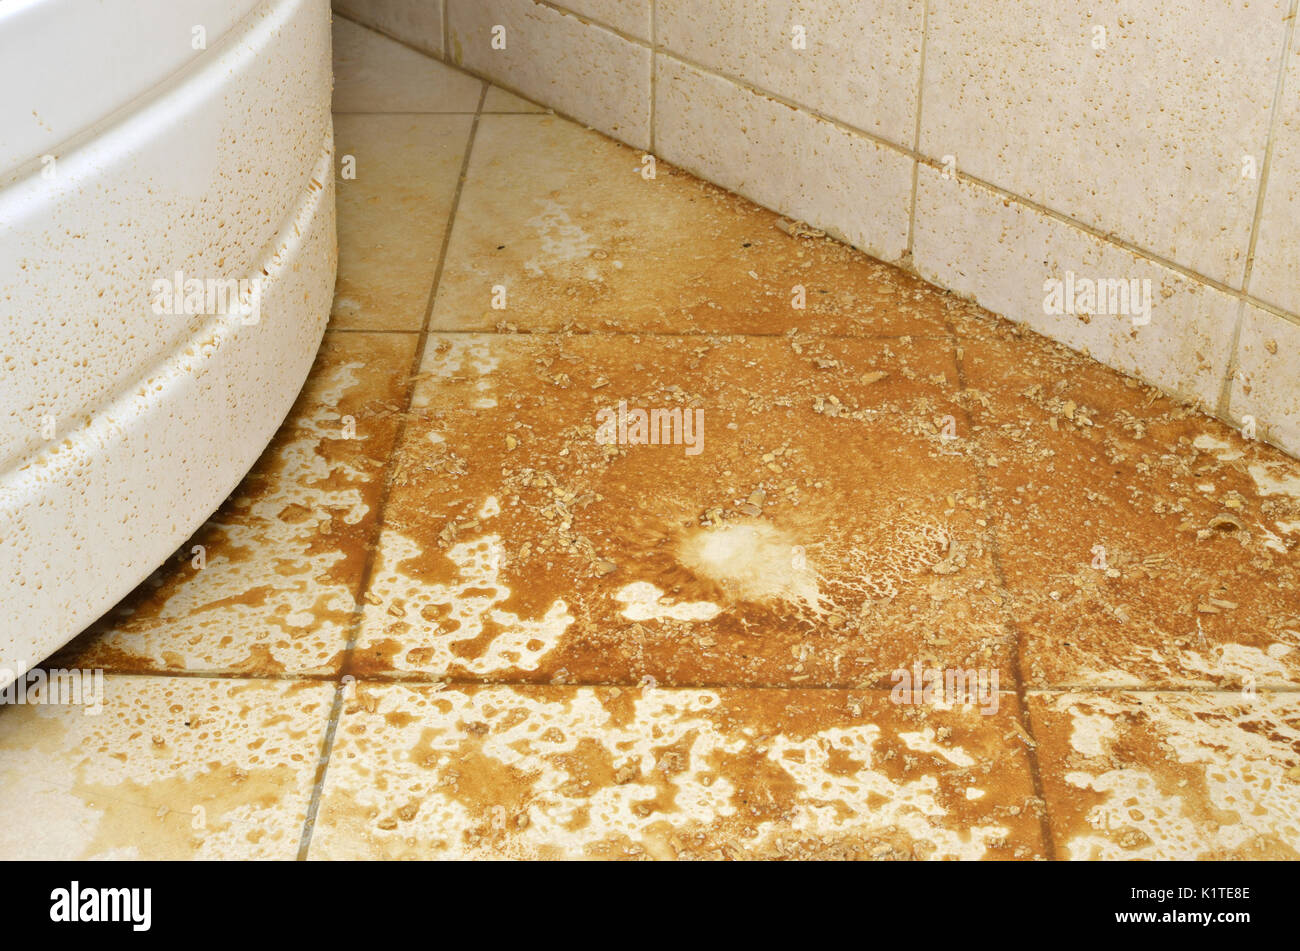 Water with scale and deposits from a boiler spilled on a bathroom floor Stock Photo